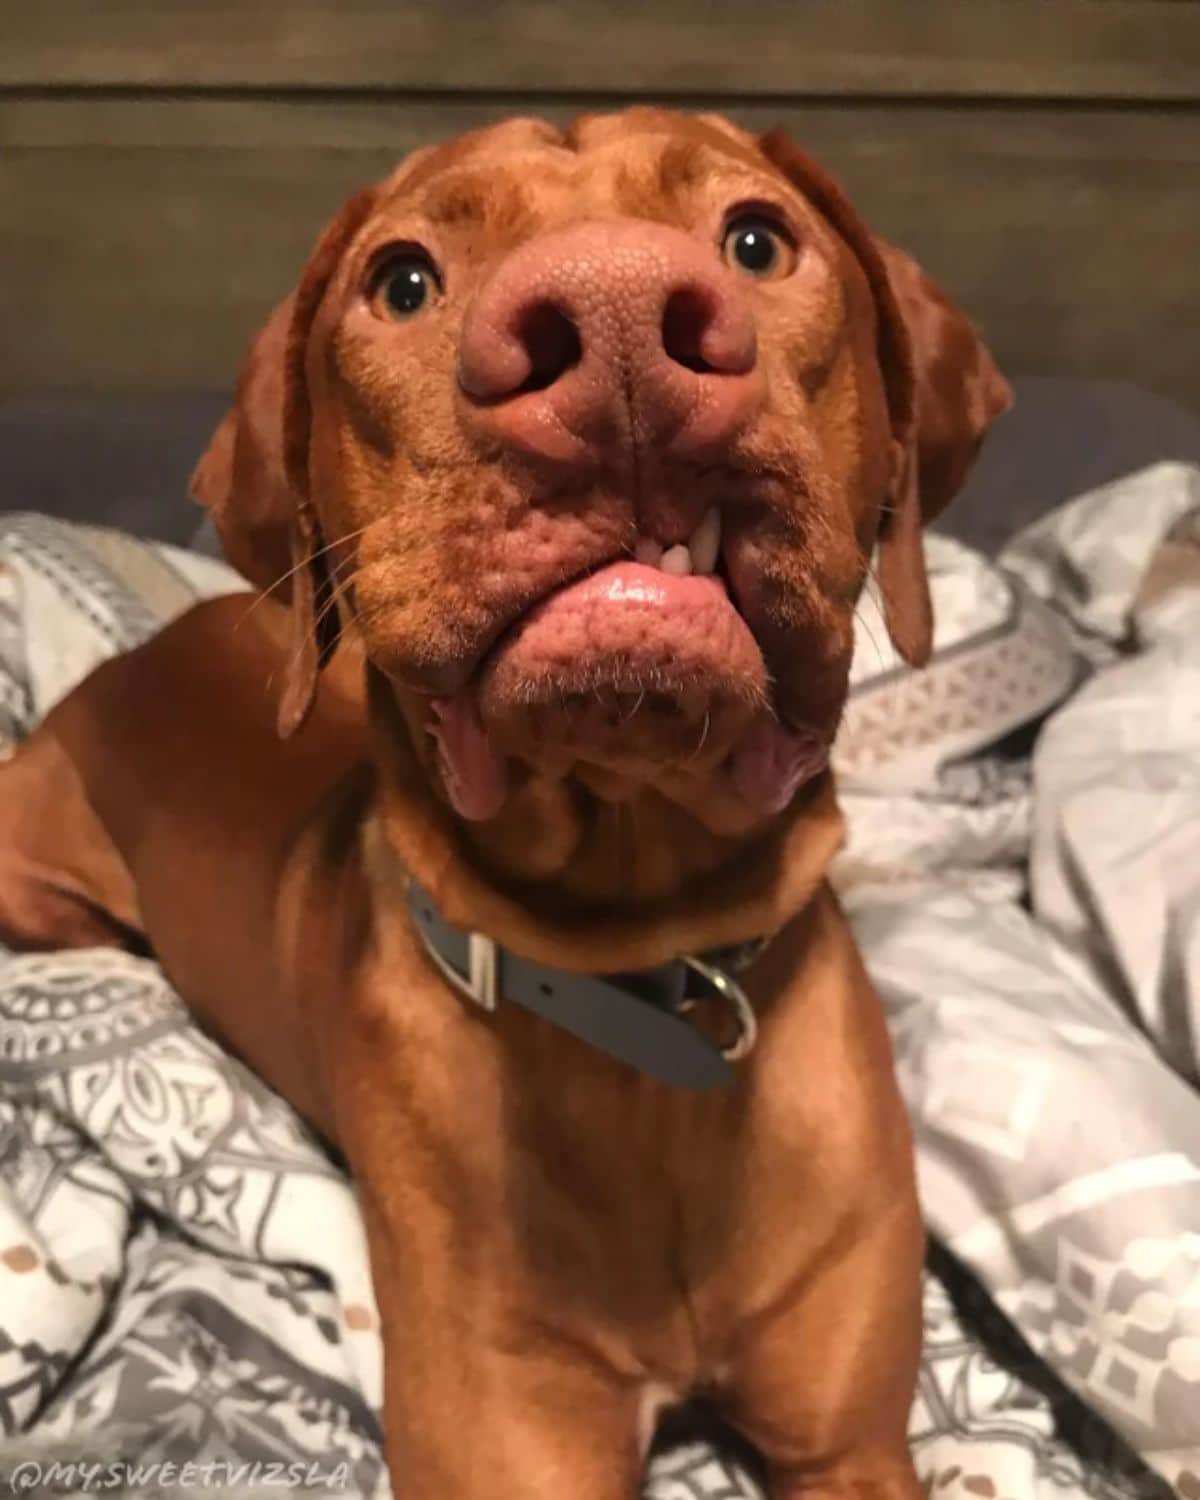 close up of brown dog's face with the lip on one side being bitten